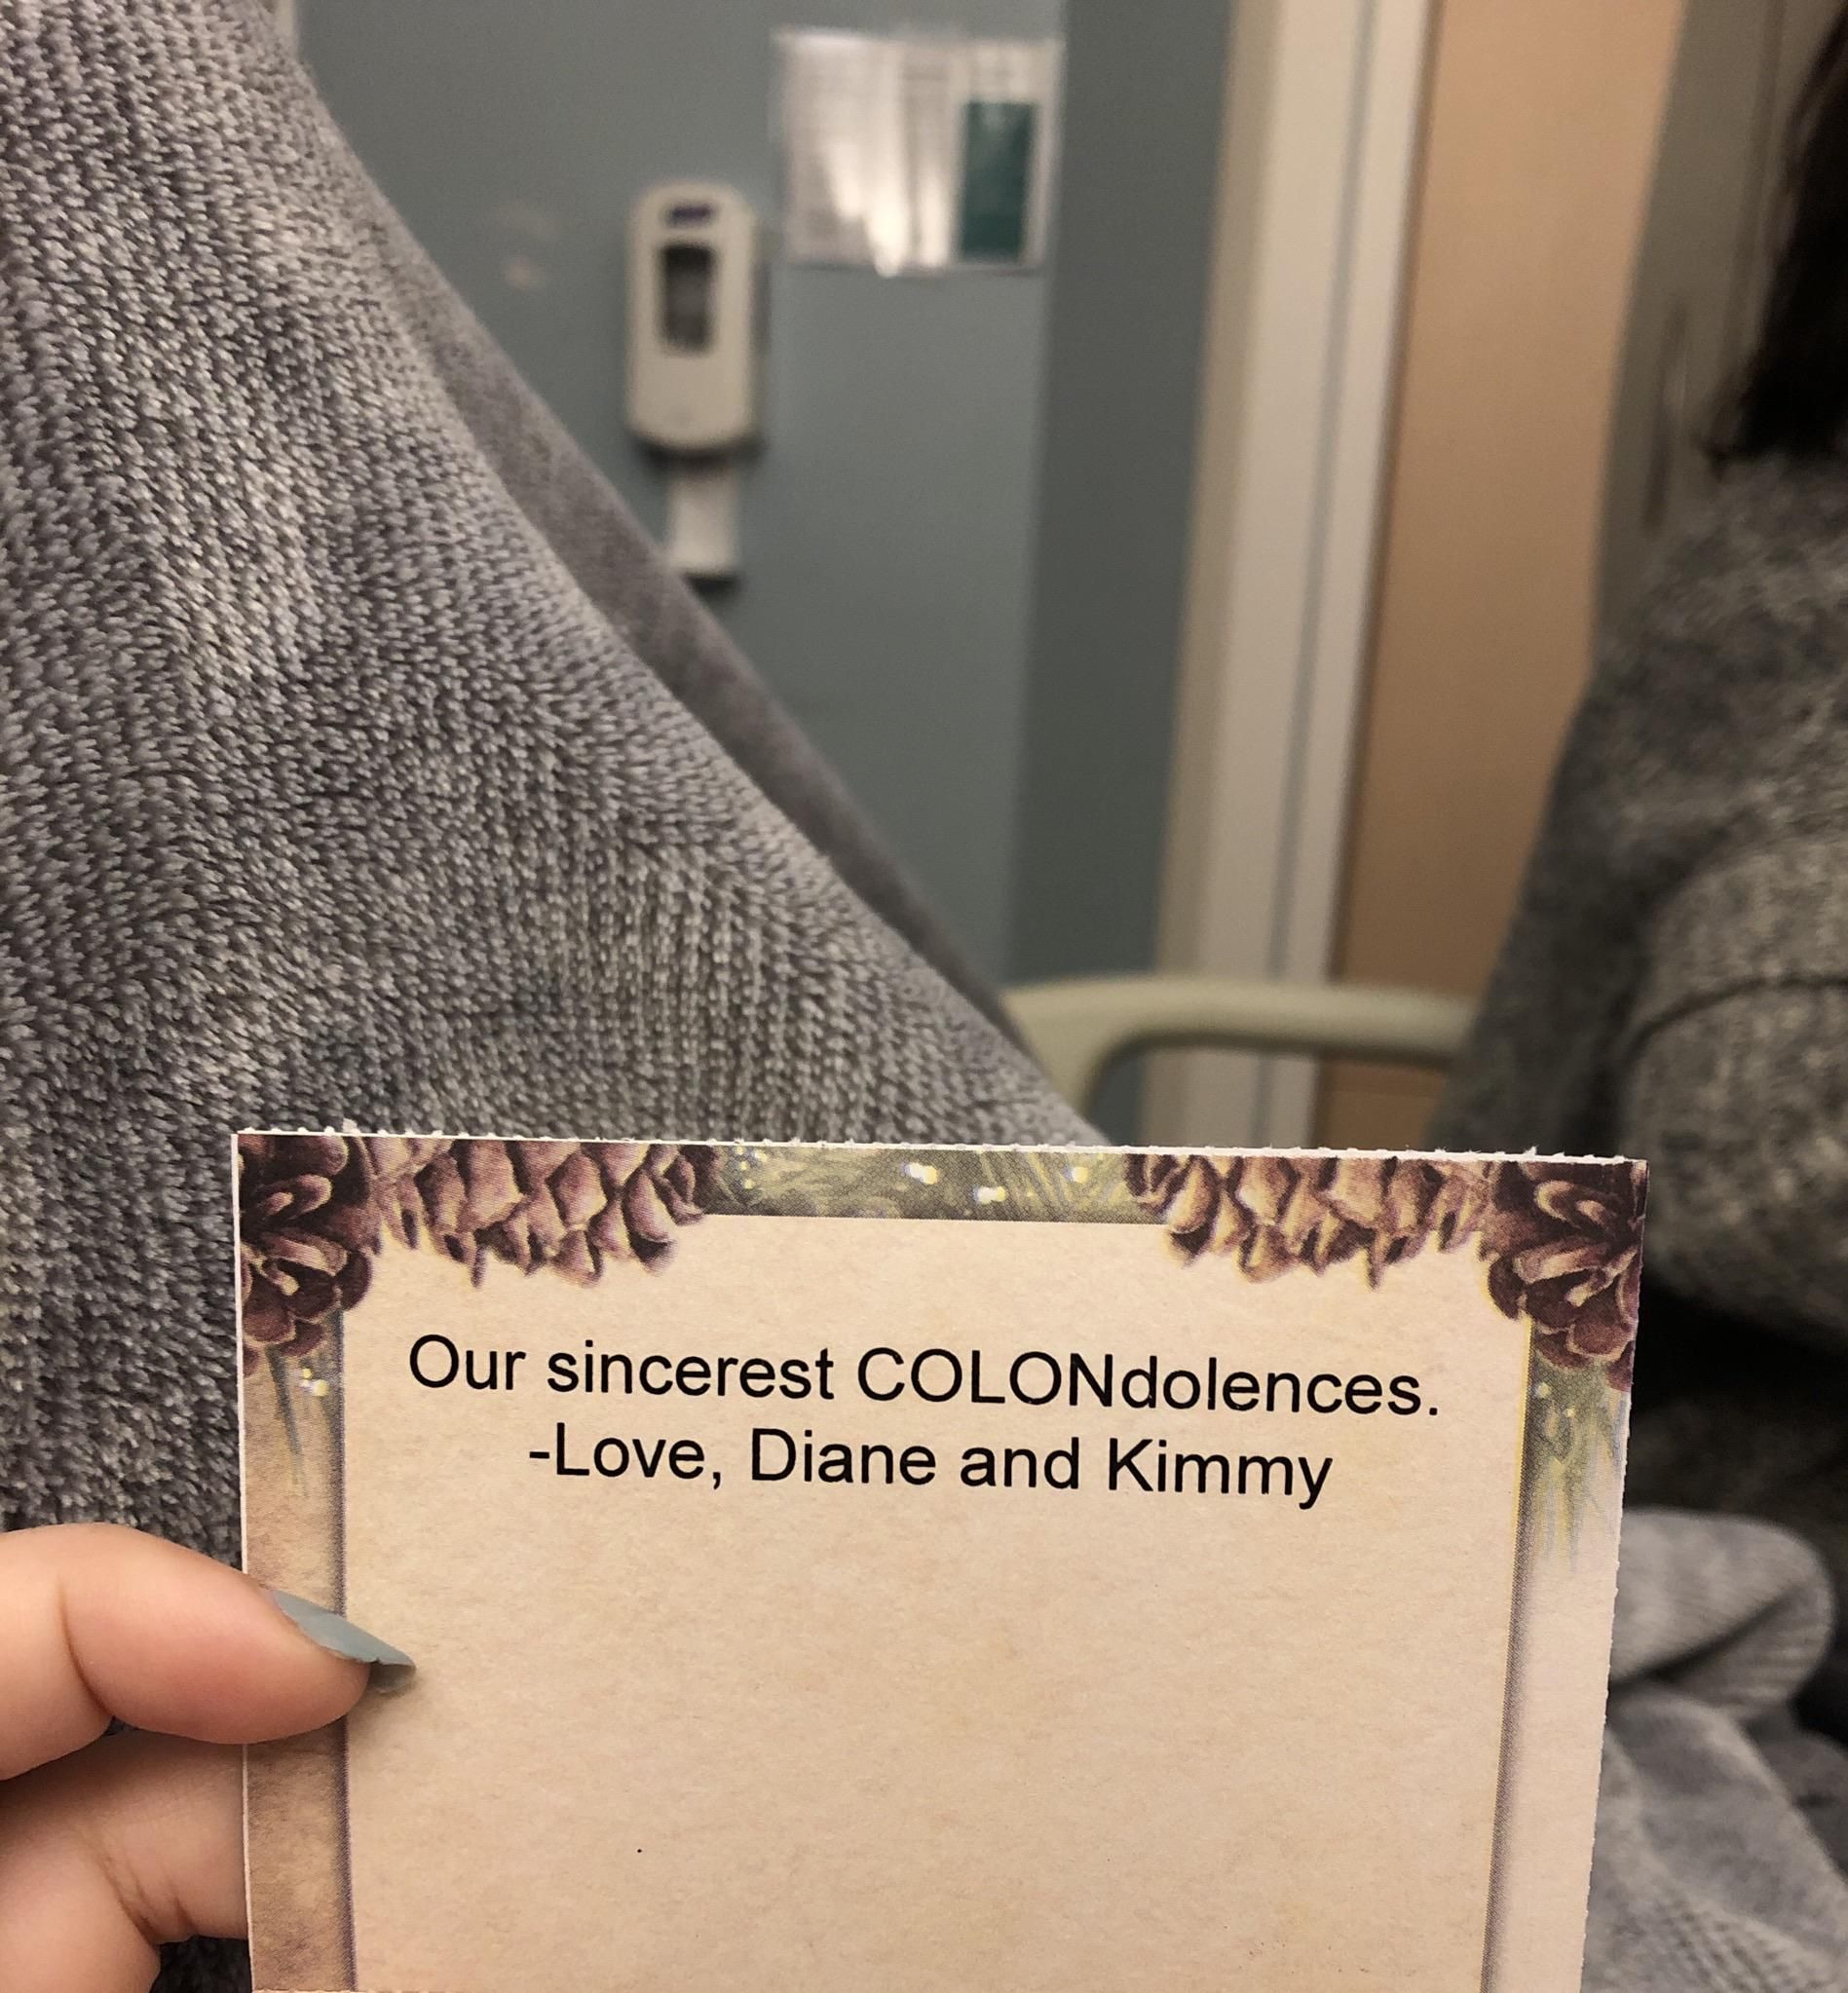 i’m in the hospital for the week as i’ve just been diagnosed with ulcerative colitis. this was on the card that came with the flowers my sisters sent me